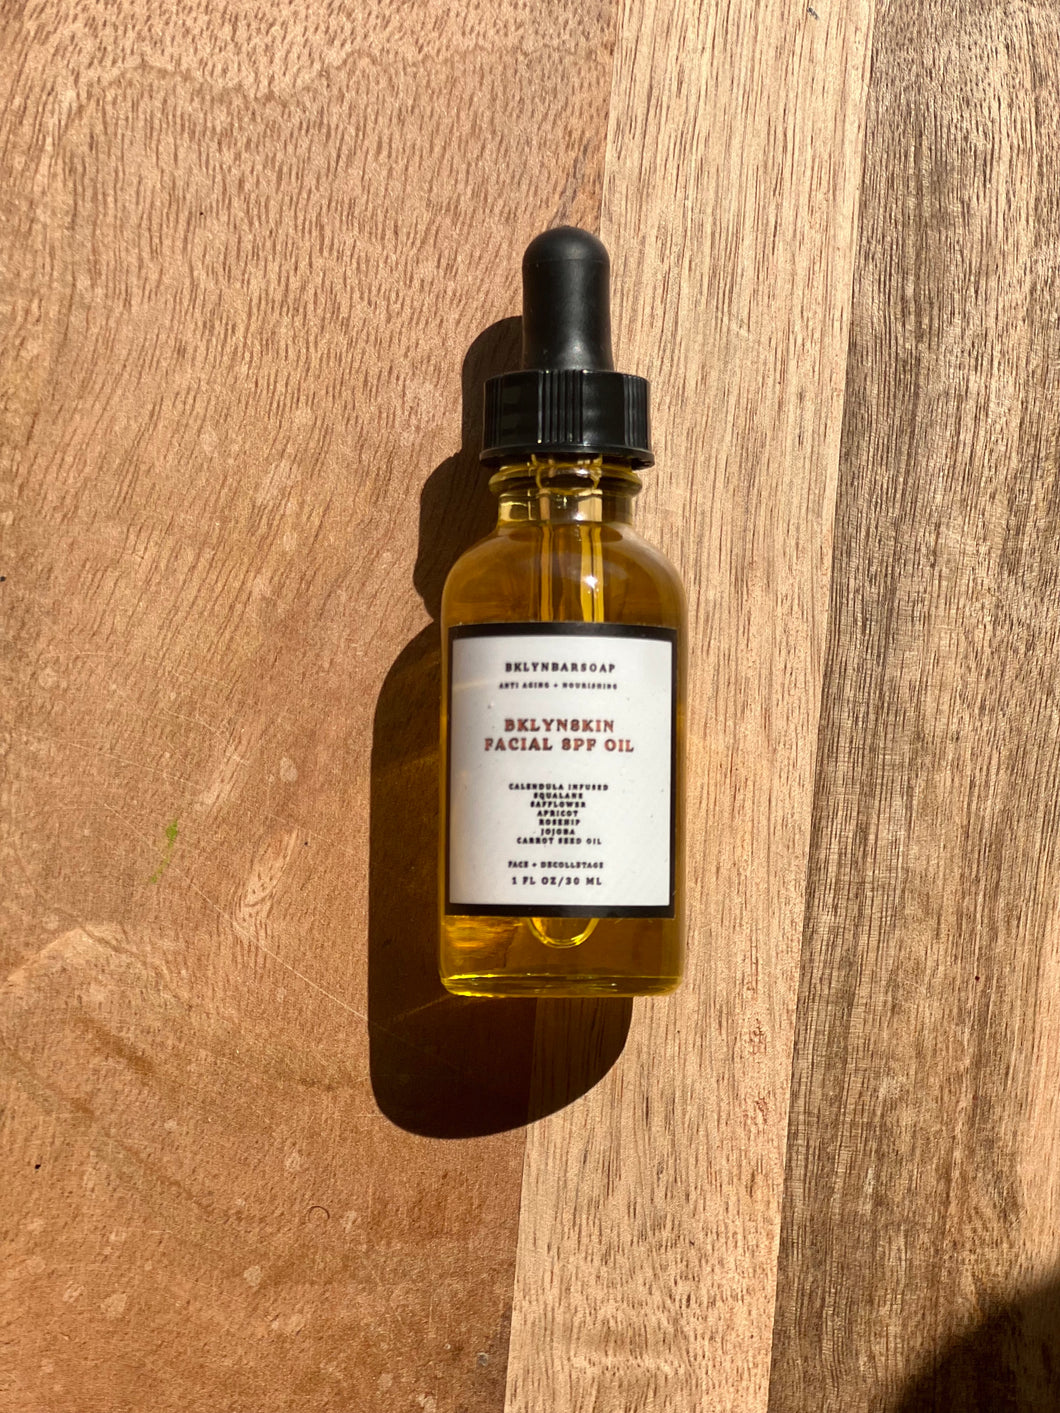 BklynSkin Facial Reparative Oil with SPF